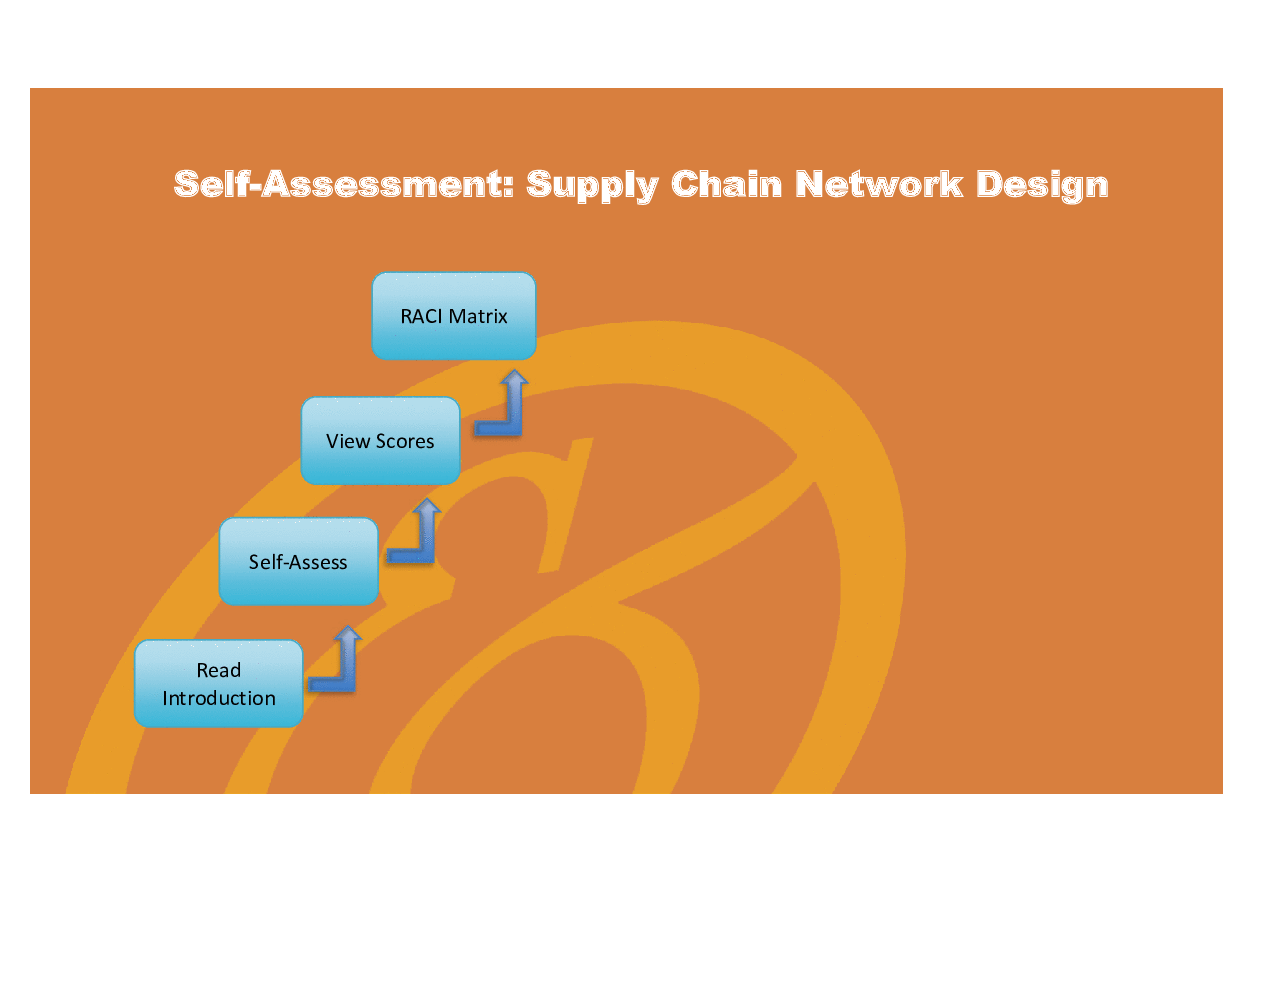 Supply Chain Network Design - Implementation Toolkit